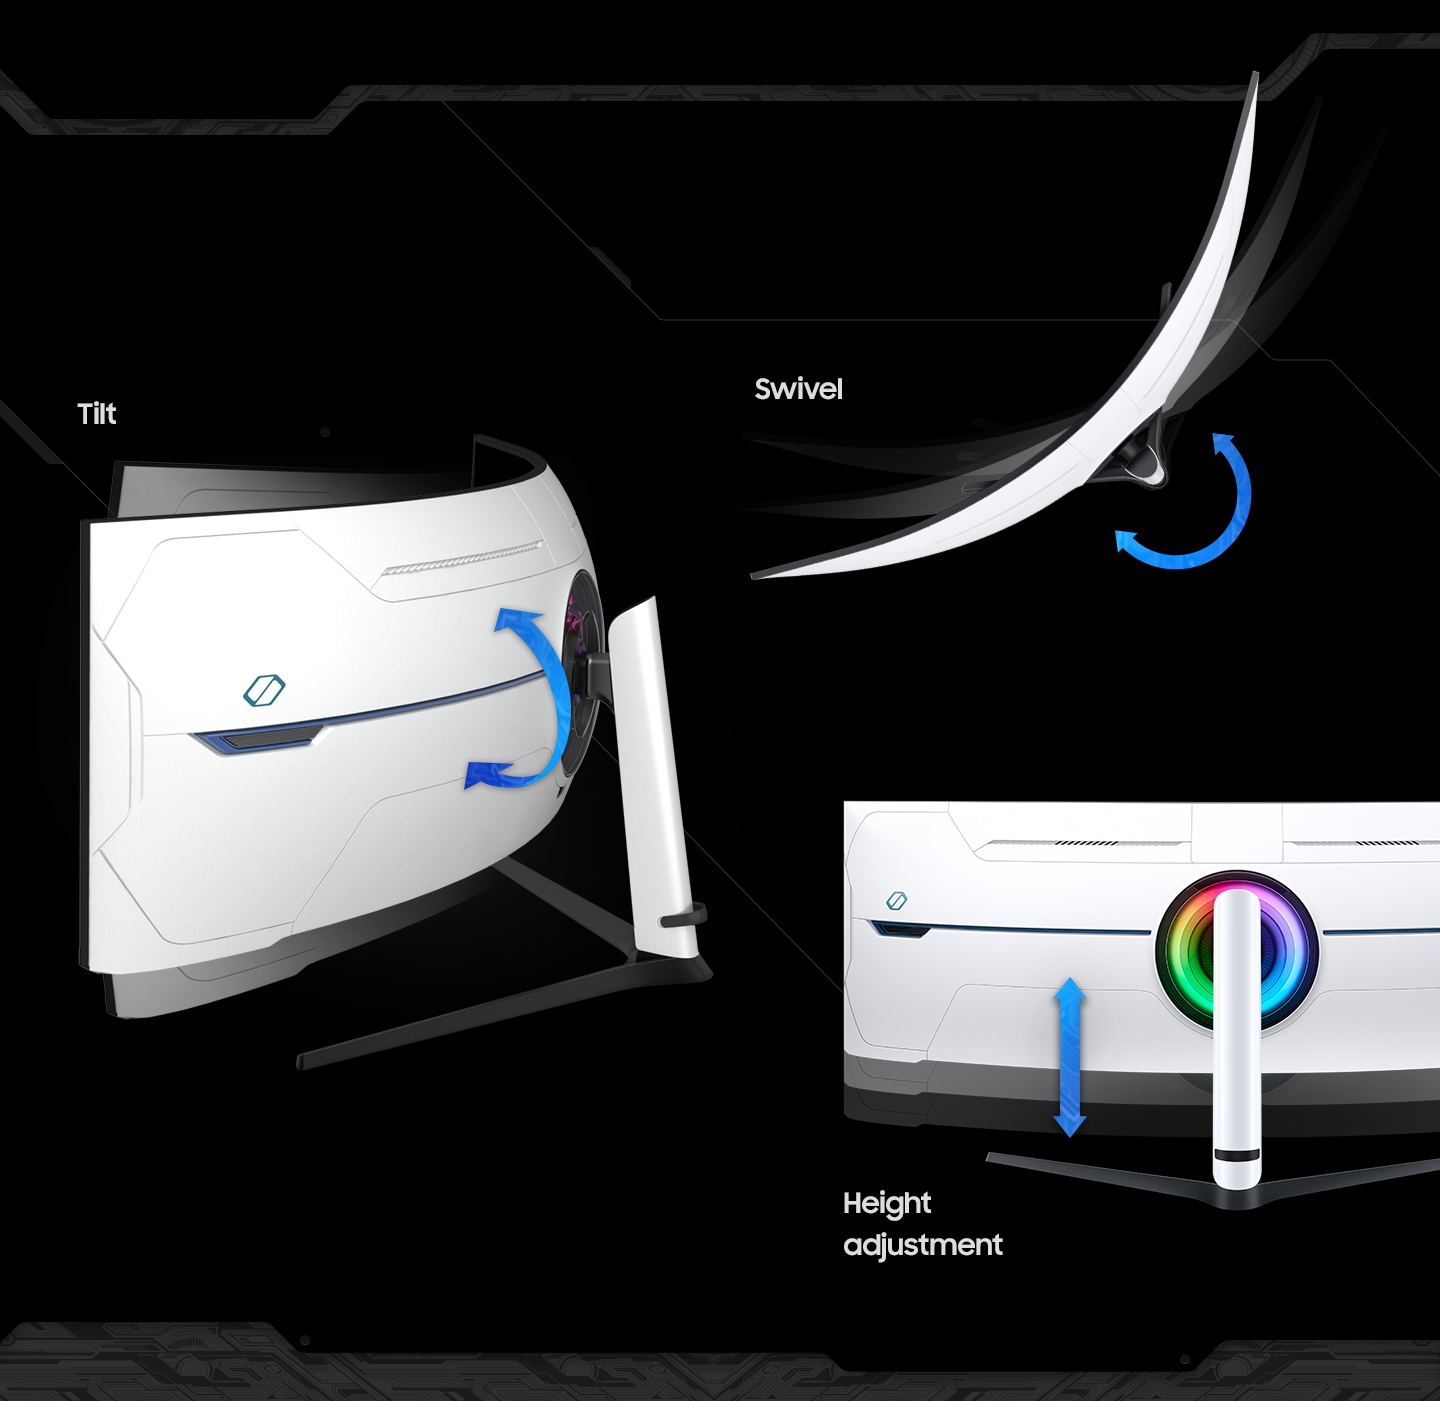 A monitor is seen three times from different angles. One view shows the monitor from the top down, while an arrow shows that the monitor rotates from left to right, with the word "Swivel." In a view from the back of the monitor, an arrow curves up and down with the word "Tilt." In a different view from the back of the monitor, arrows point straight up and down with the words "Height adjustment."